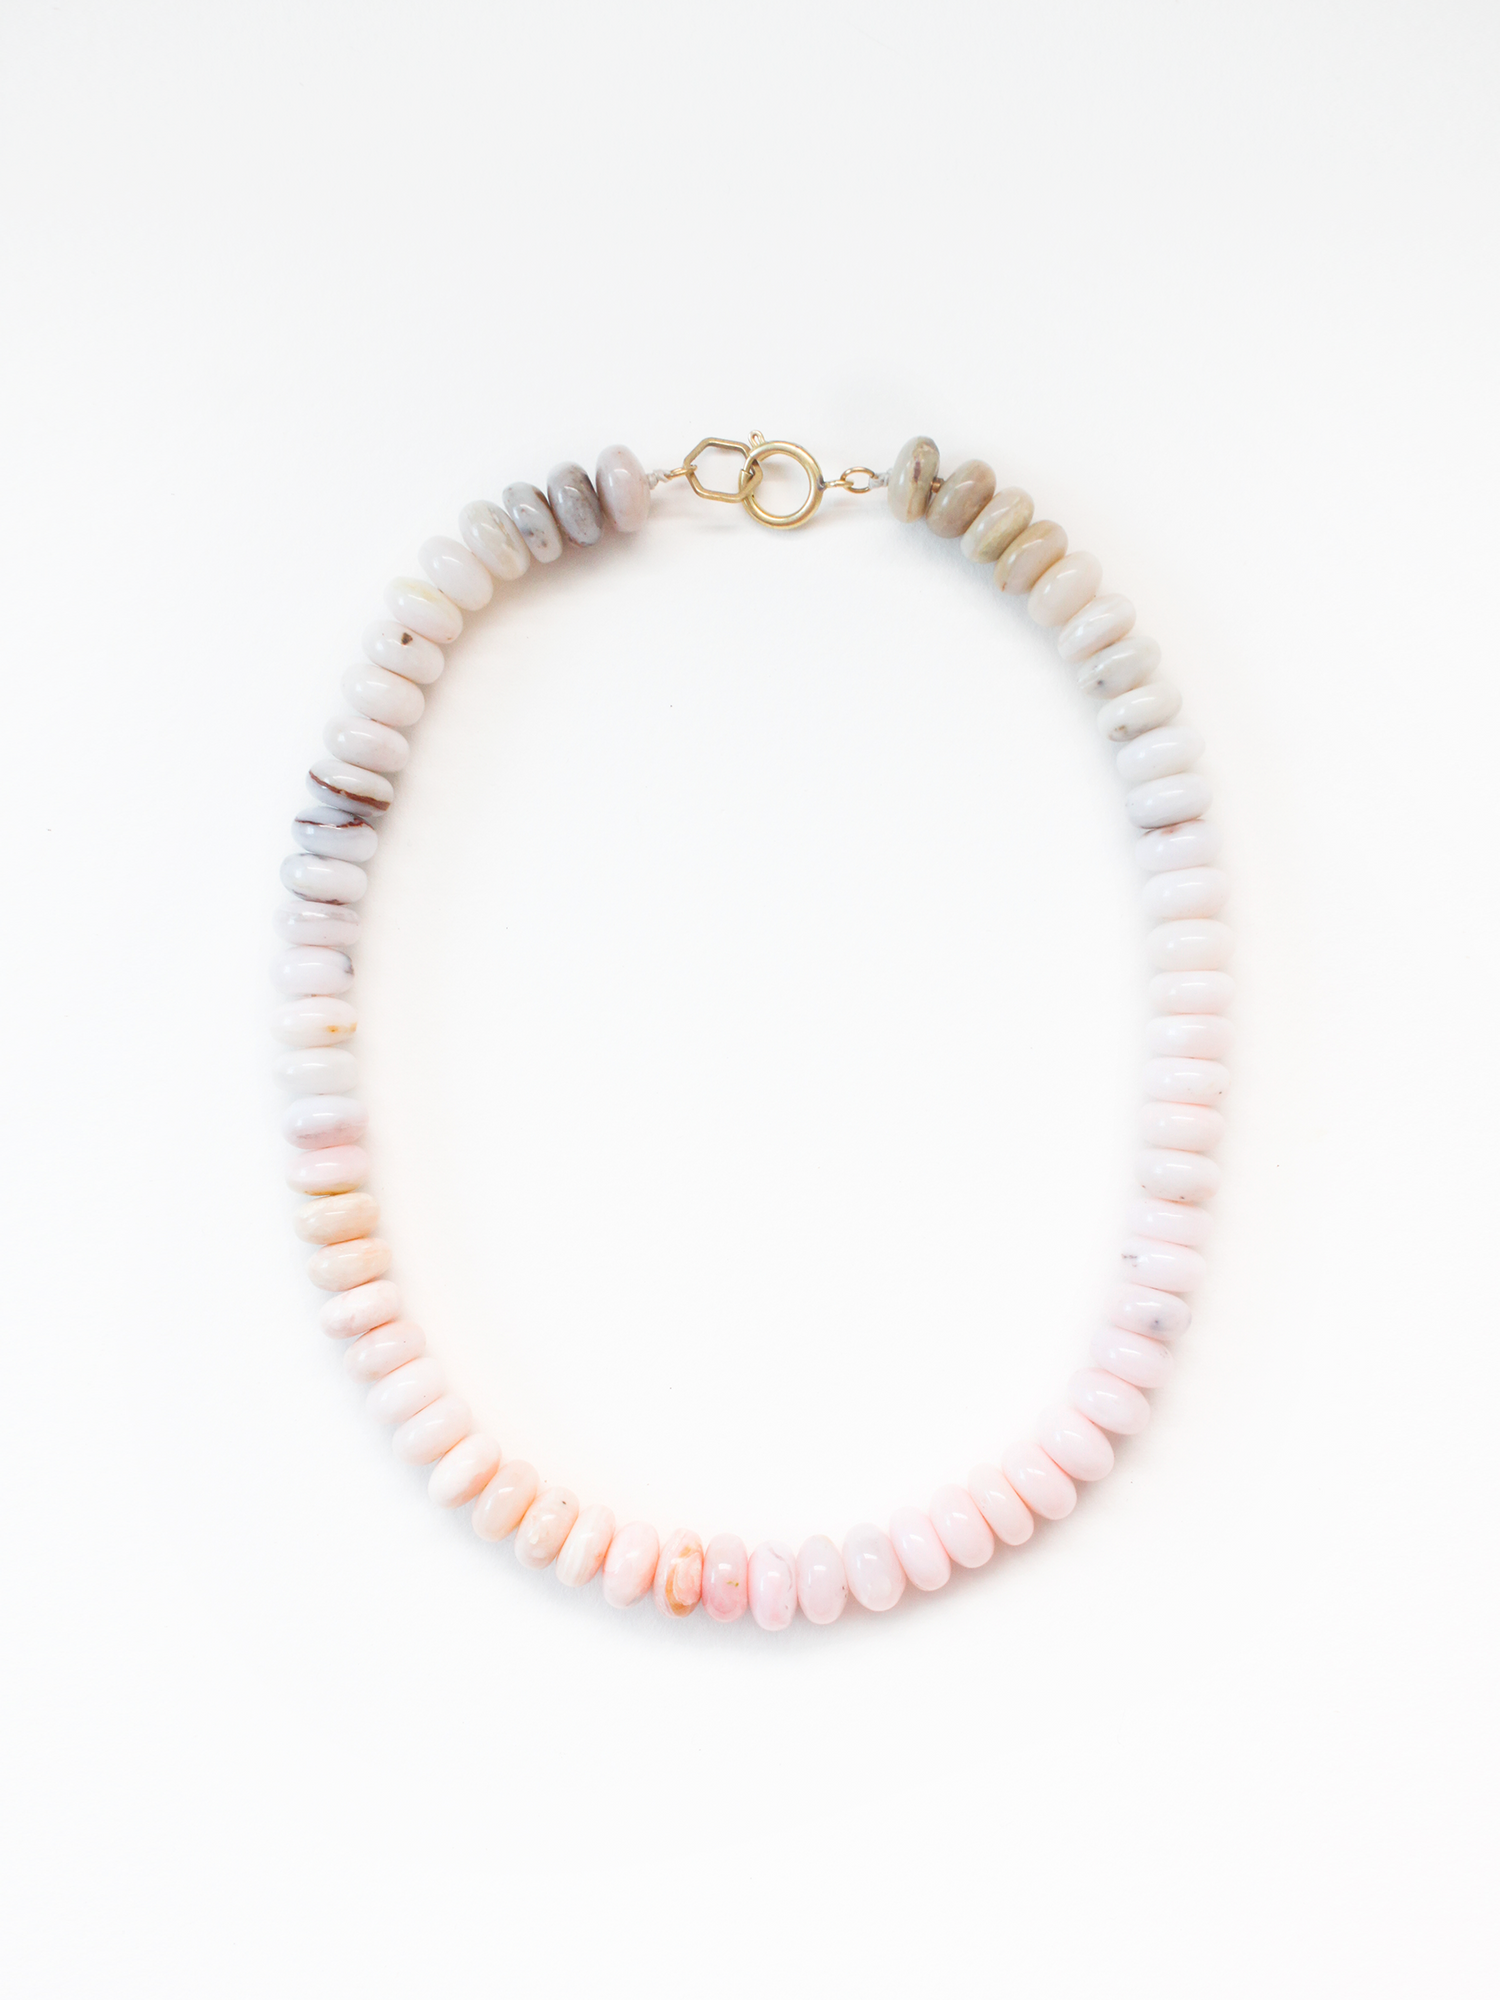 Stone Necklace - Pink Opal Rondelle